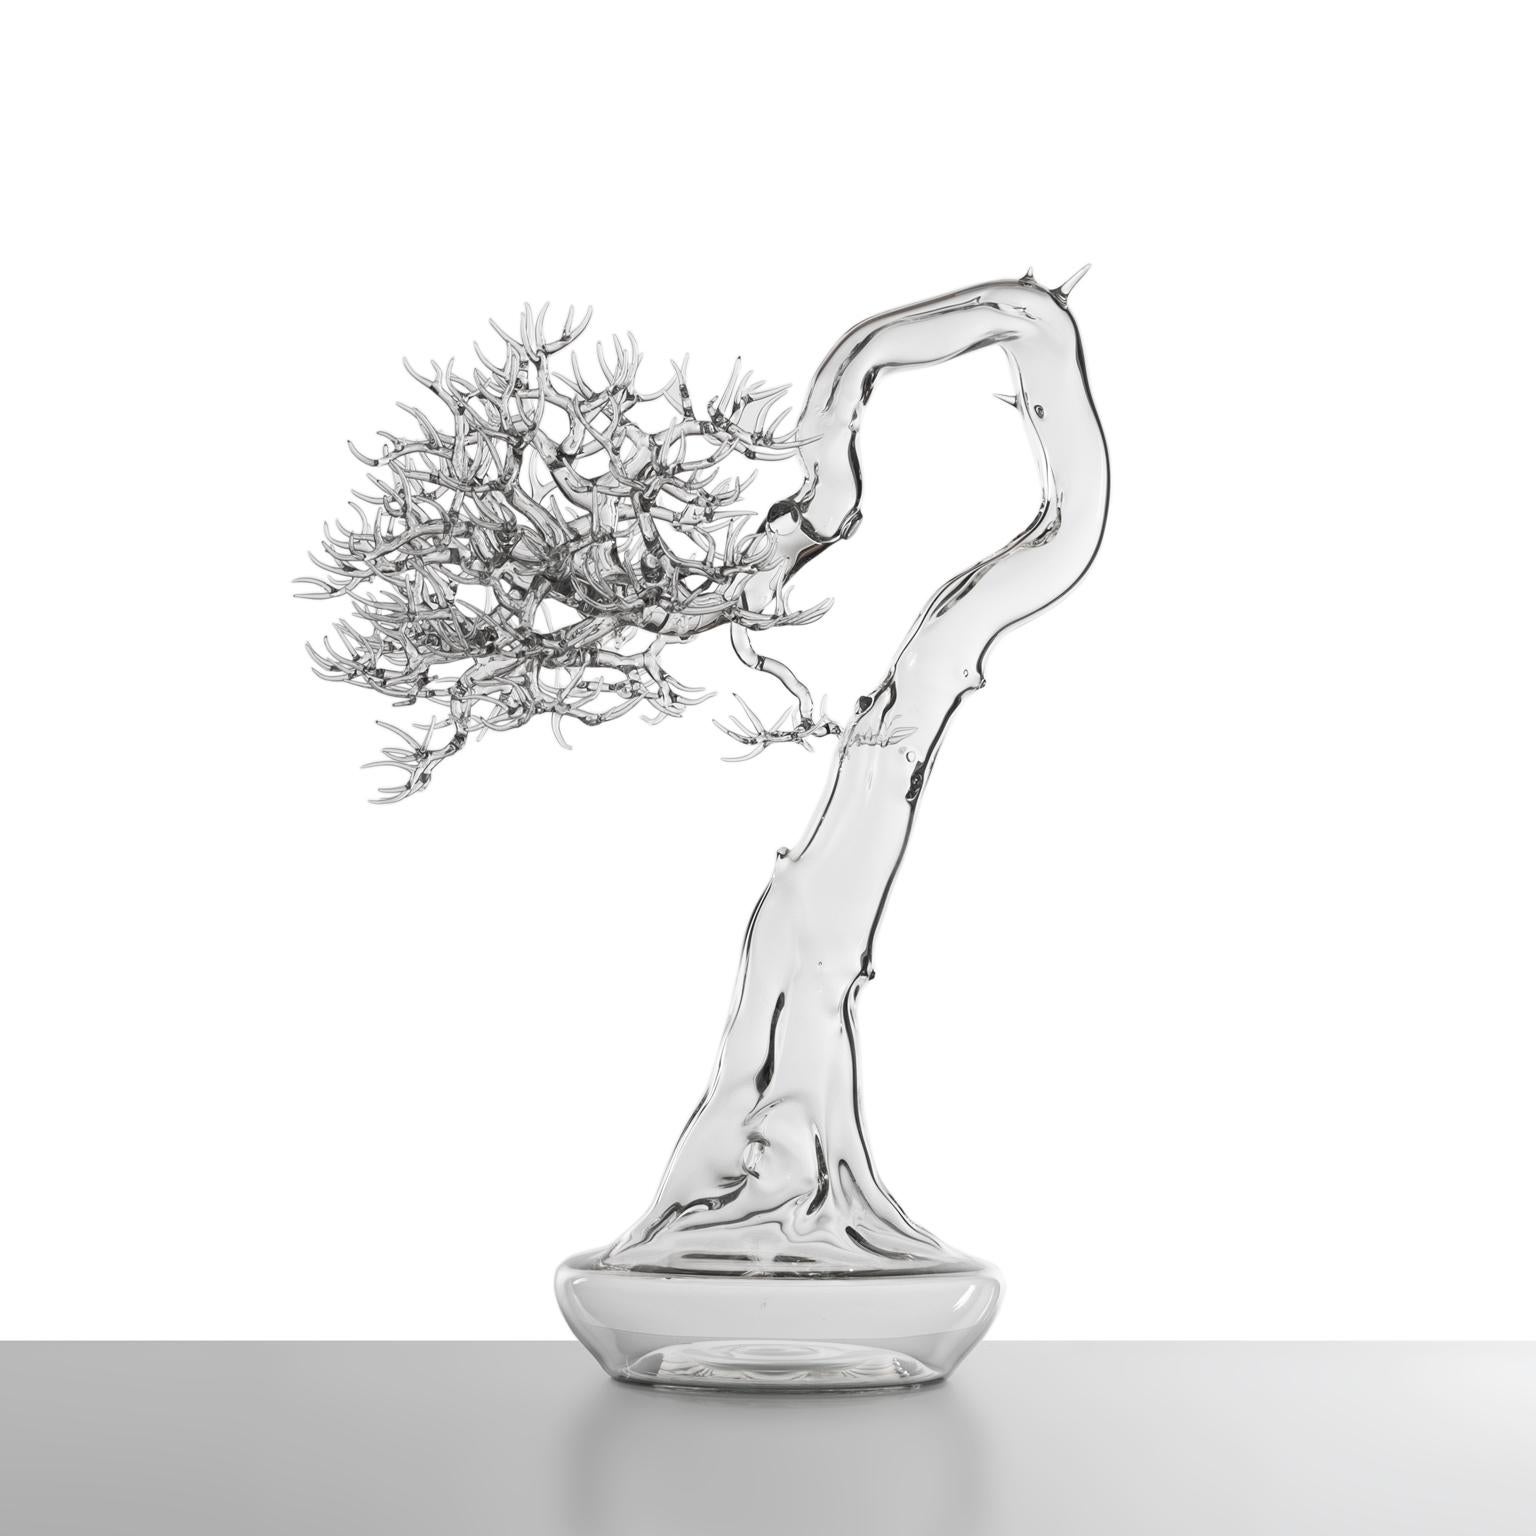 Hand-blown glass sculpture representing a bonsai tree.

Artist: Simone Crestani
Material: Borosilicate glass
Technique: Flameworking
Unique piece
Year: 2021
Measures: Height 22.04'', width 15.74'', depth 11.81'' in
Signed and dated on the